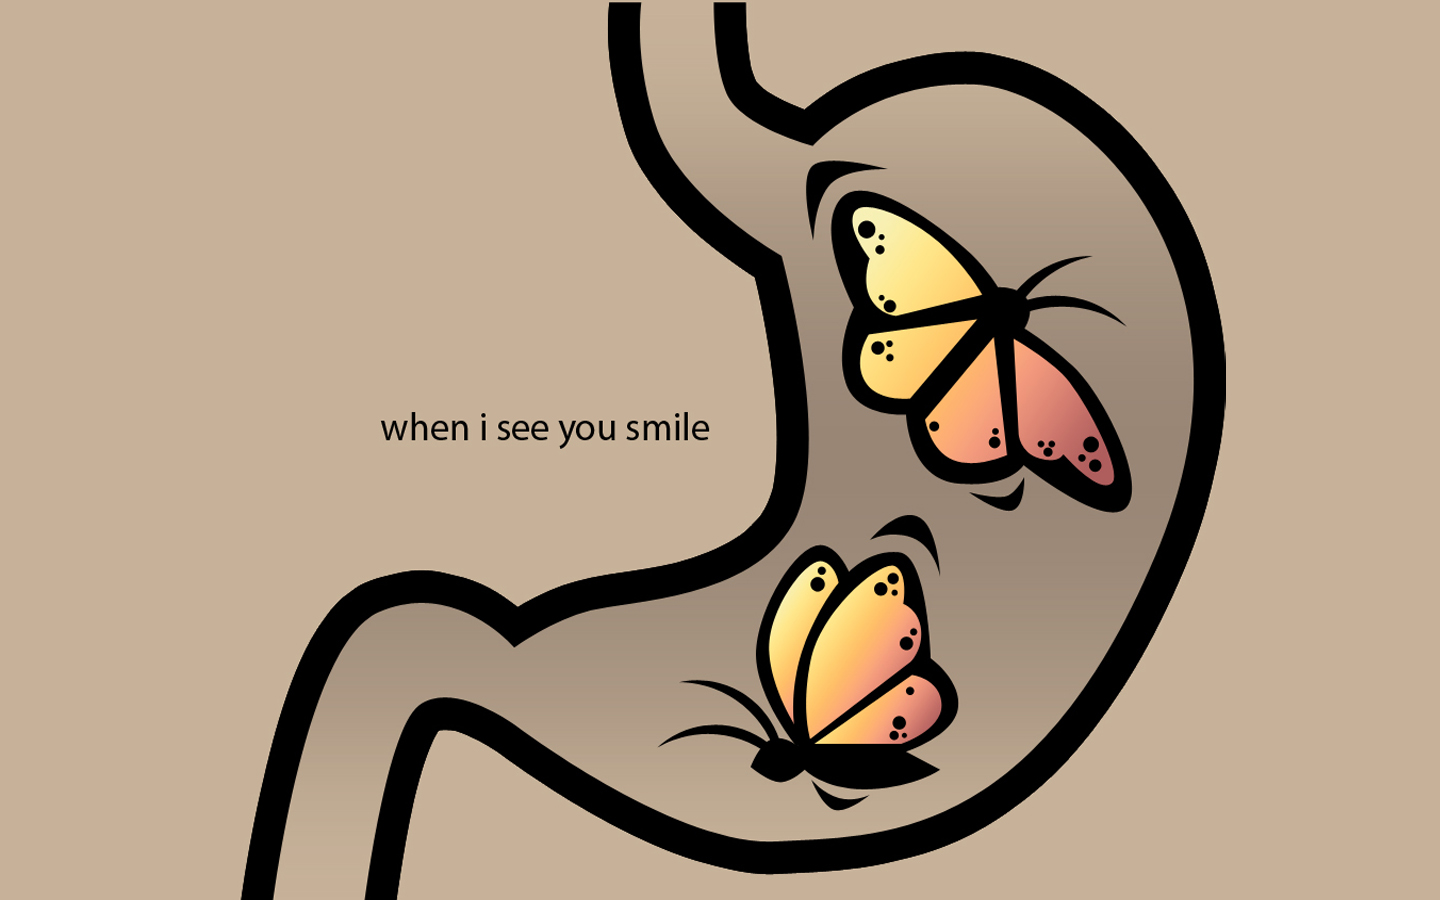 Butterflies in my stomach when I see you smile